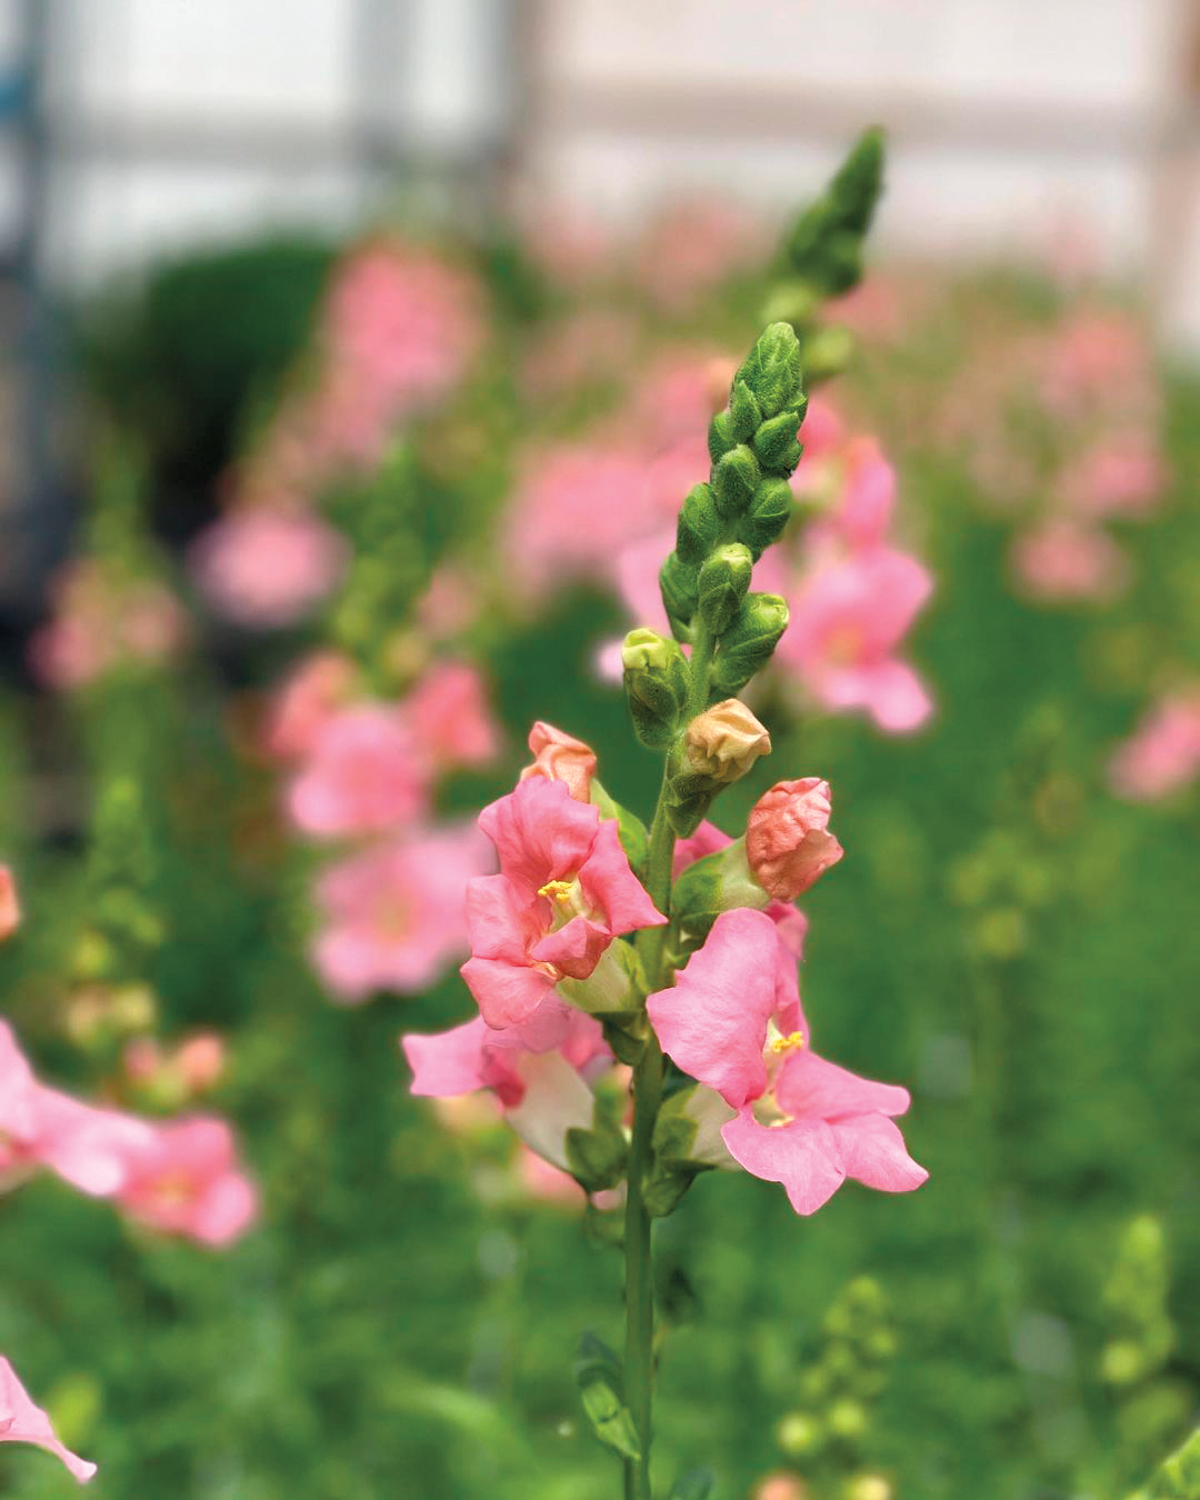 Closeup of a pink snapdragon flower